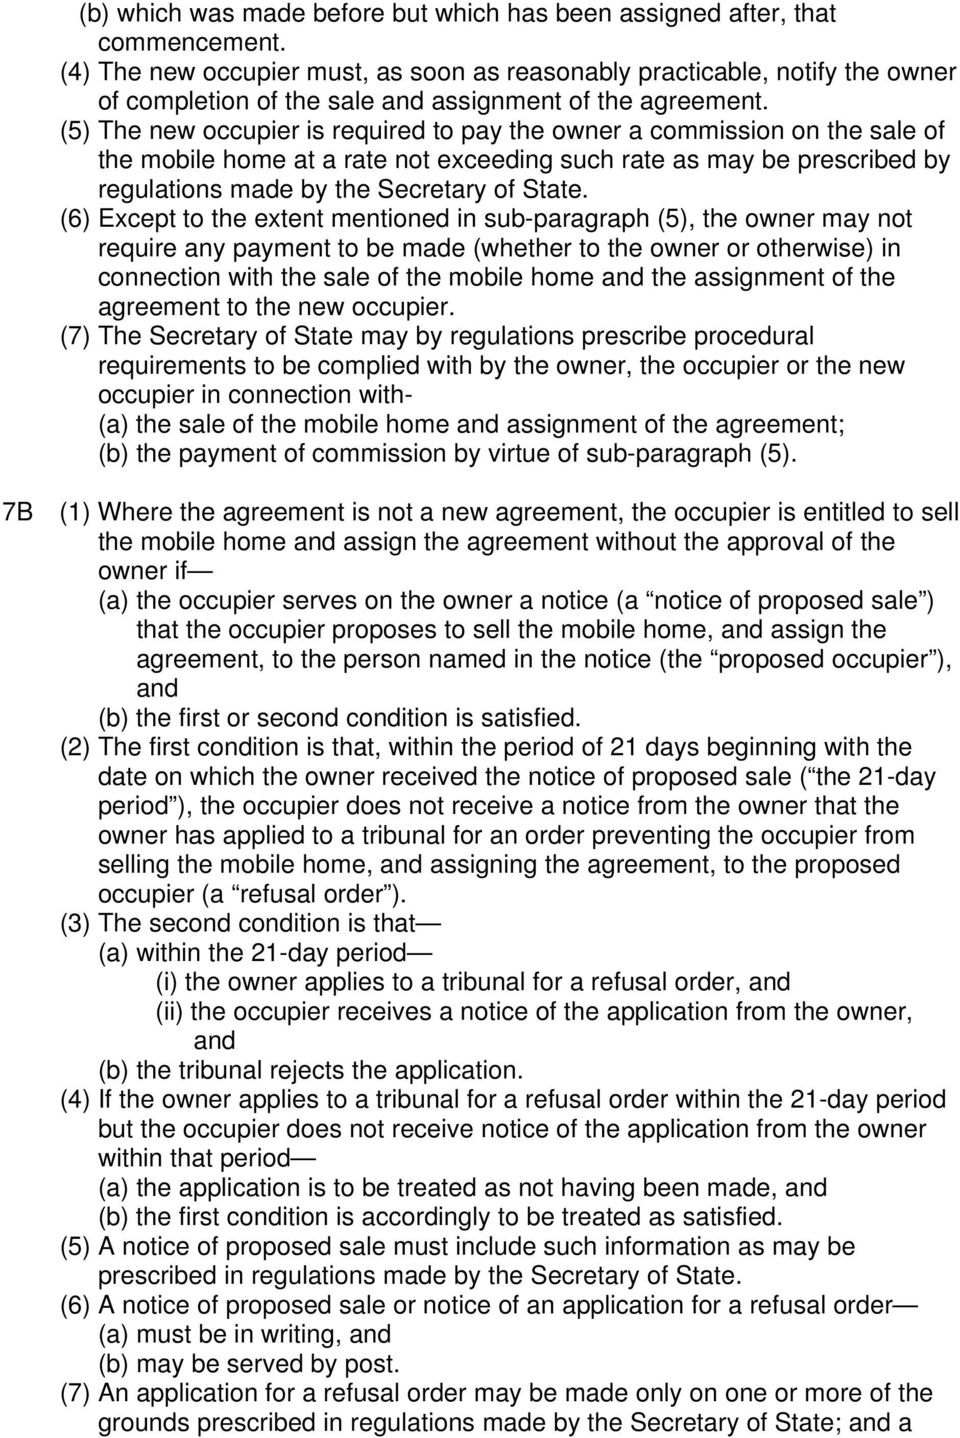 (5) The new occupier is required to pay the owner a commission on the sale of the mobile home at a rate not exceeding such rate as may be prescribed by regulations made by the Secretary of State.